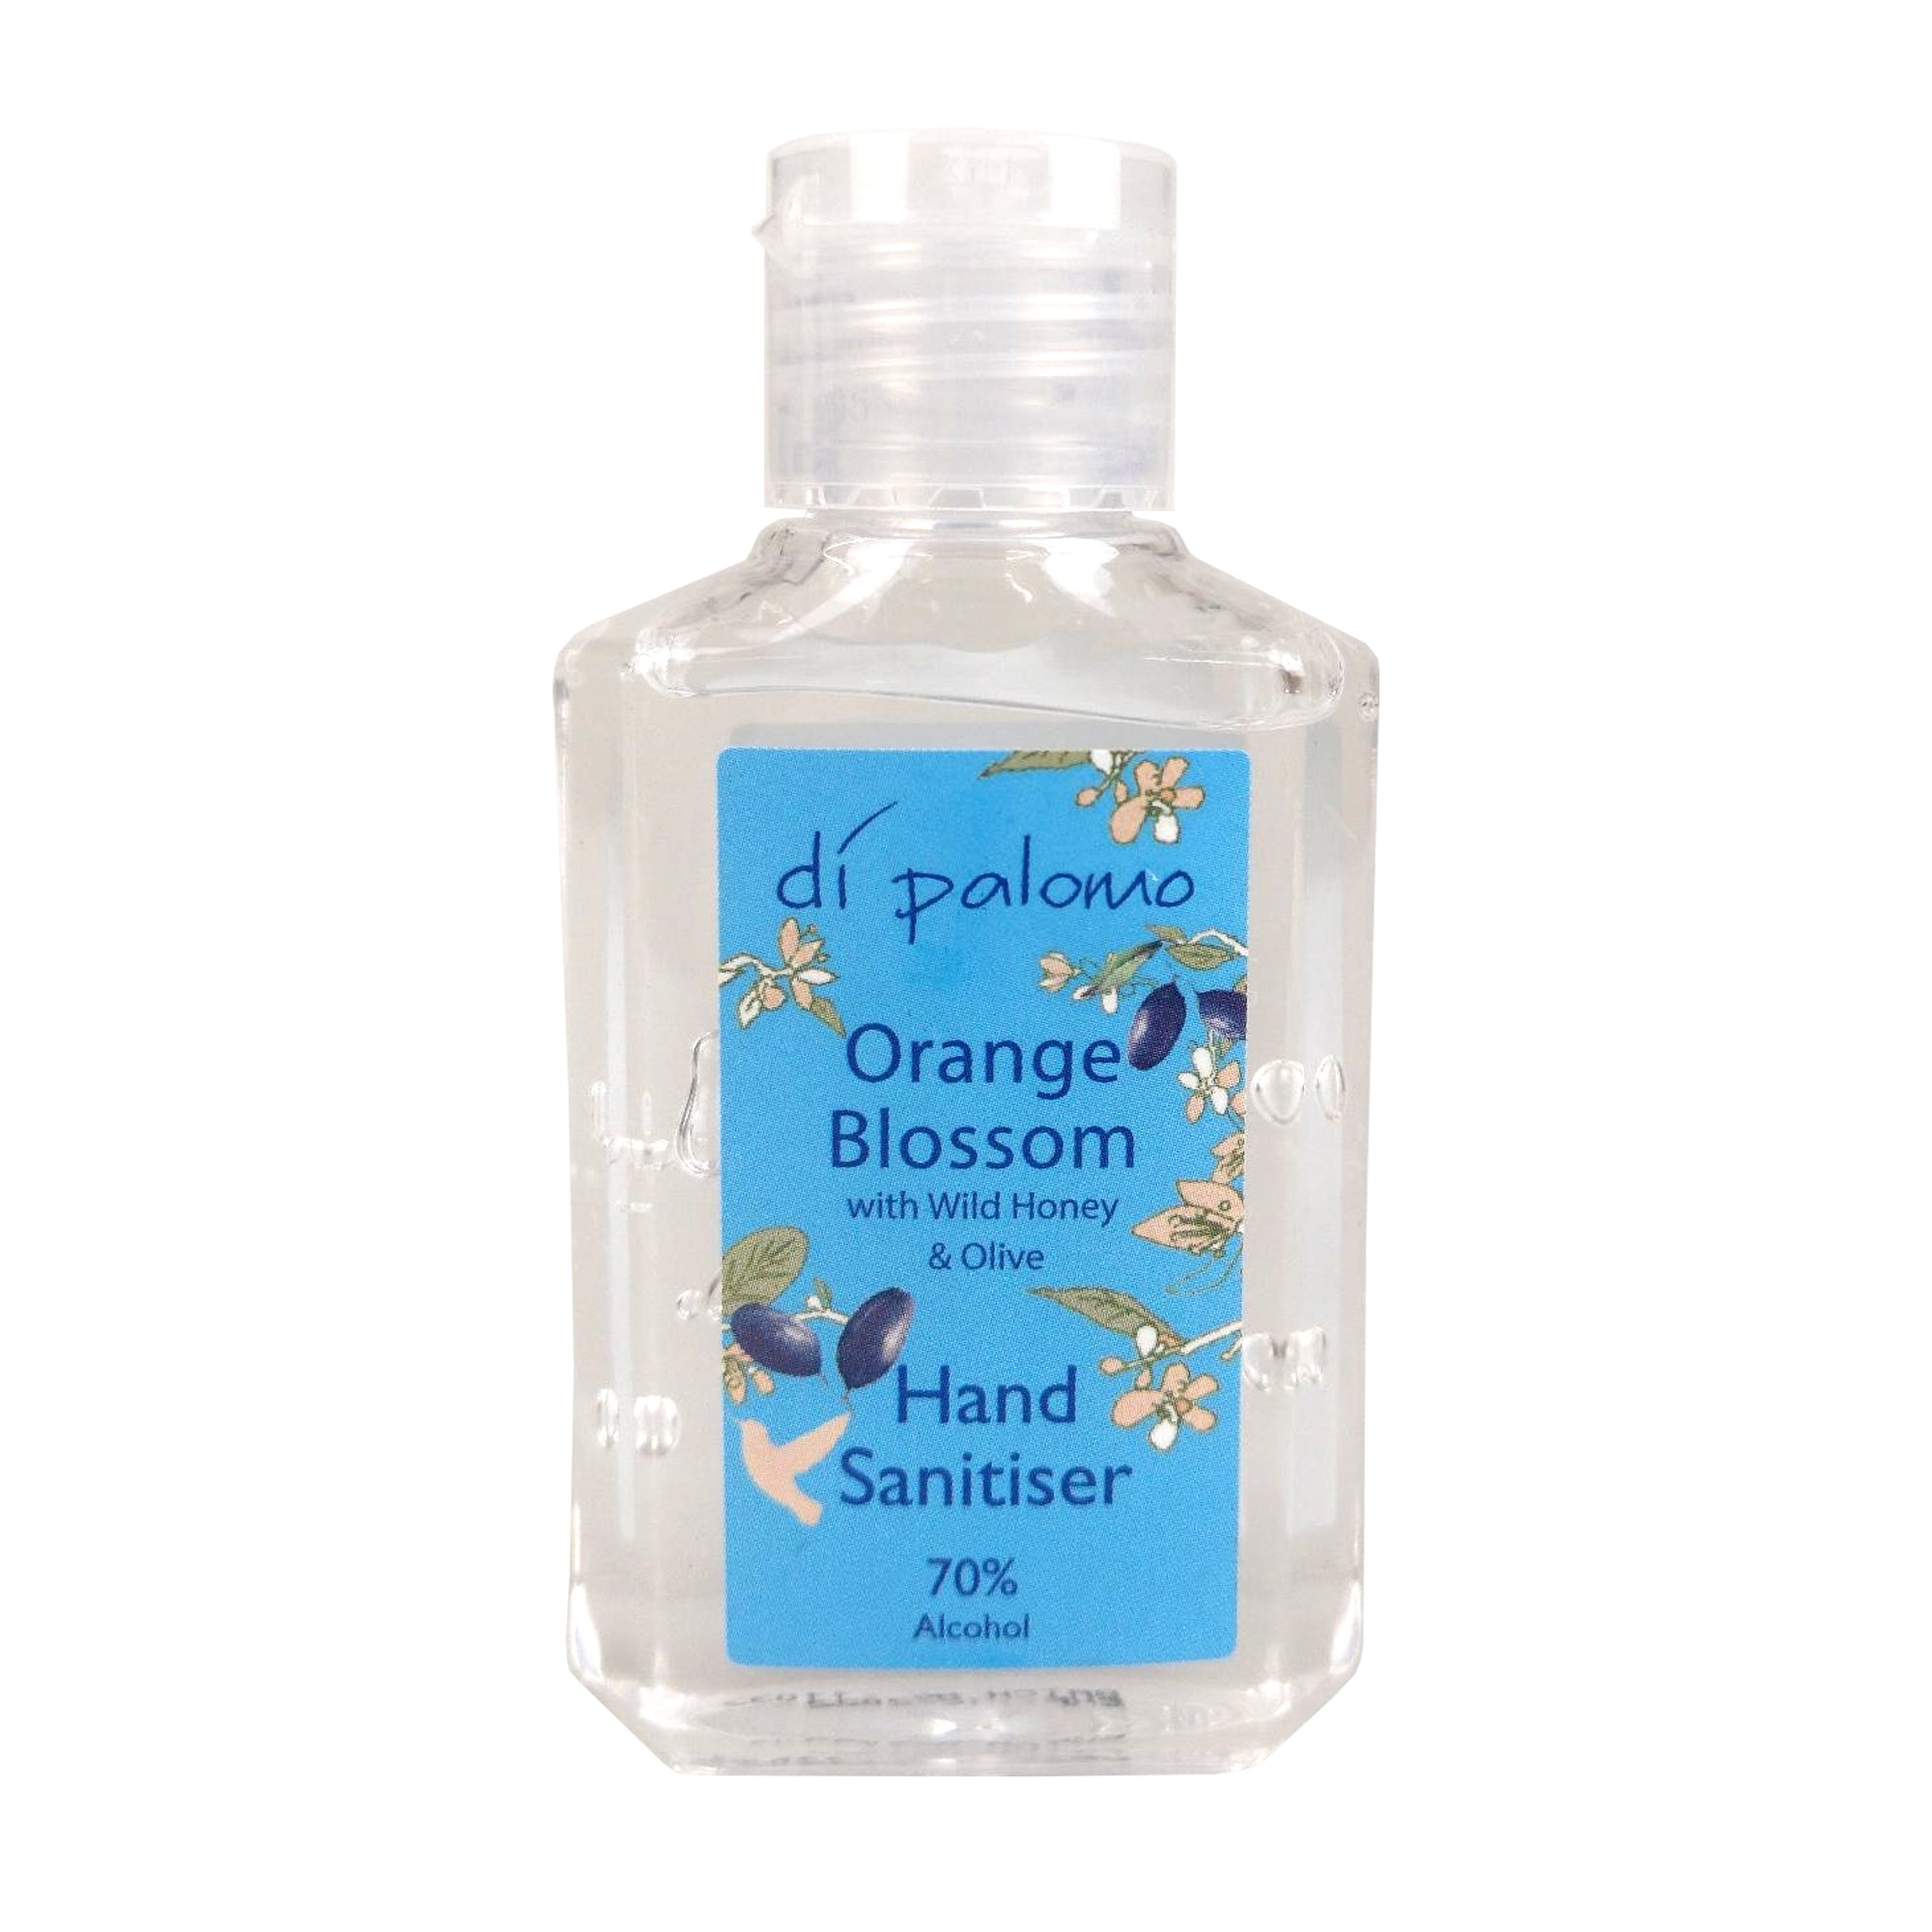 The perfect companion on the Go... Small and compact to fit in pockets and handbags, our Orange Blossom Hand Sanitiser is now a must have for any trip.It’s important to be able to sanitise on the go now, our formula can deliver the cleansing your hands need during busy days while the addition of aloe will moisturise and keep your skin from feeling dry.A must have for home life, work and trips out with friends.